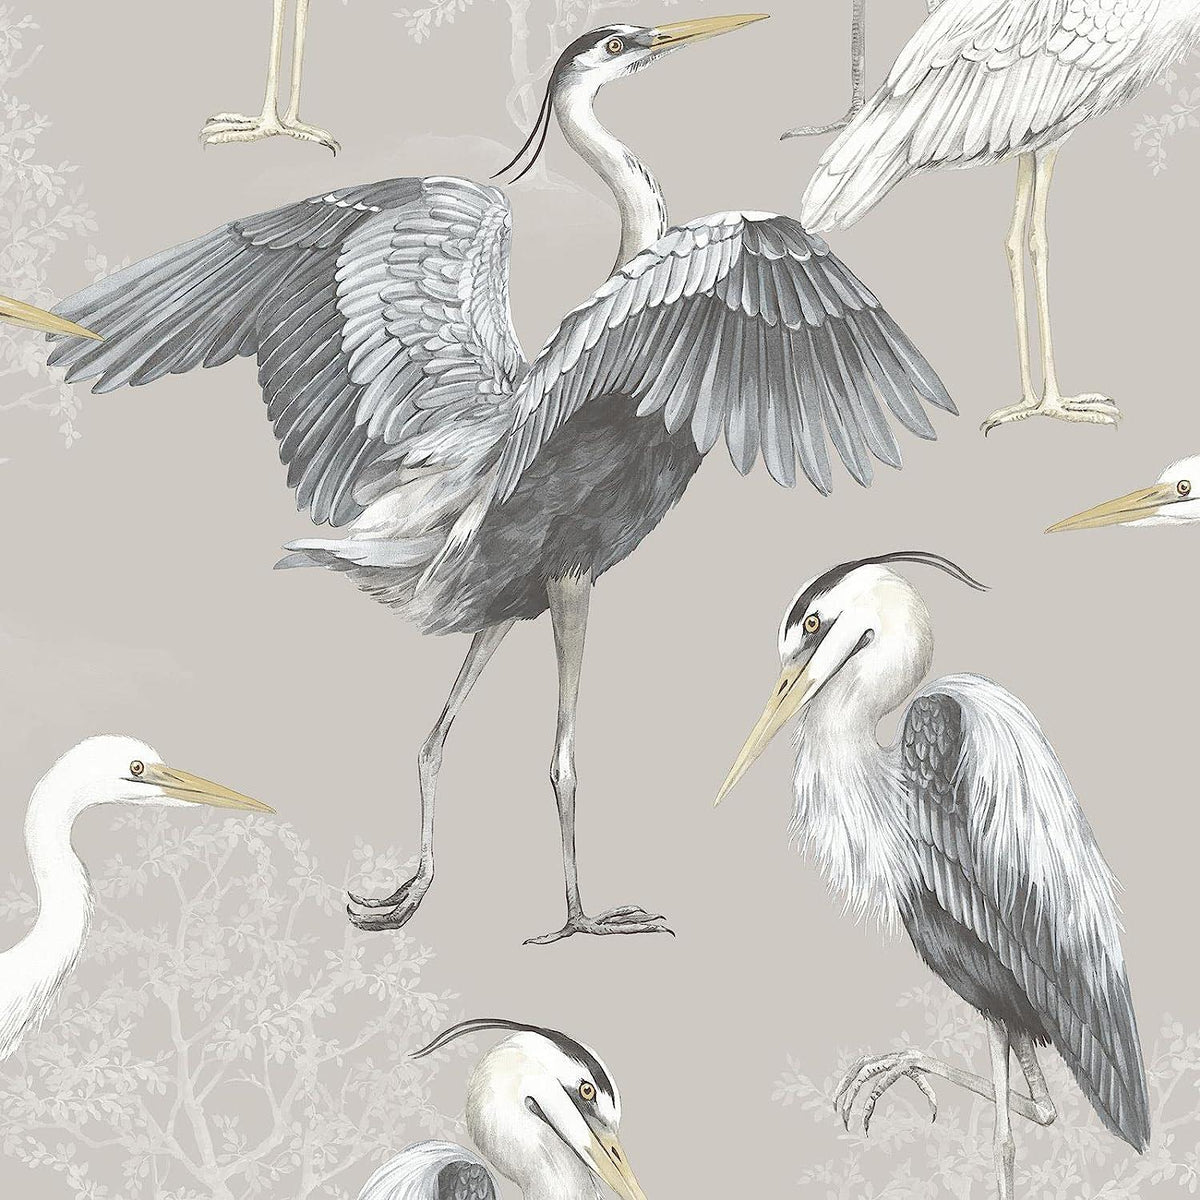 RASCH (U.K) Limited Dimension Heron Wallpaper - Modern Wallpaper for Living Room, Bedroom, Fireplace - Decorative Luxury Nature Wall Paper with Hand-Drawn Herons &amp; Trees (White/Grey/Beige)